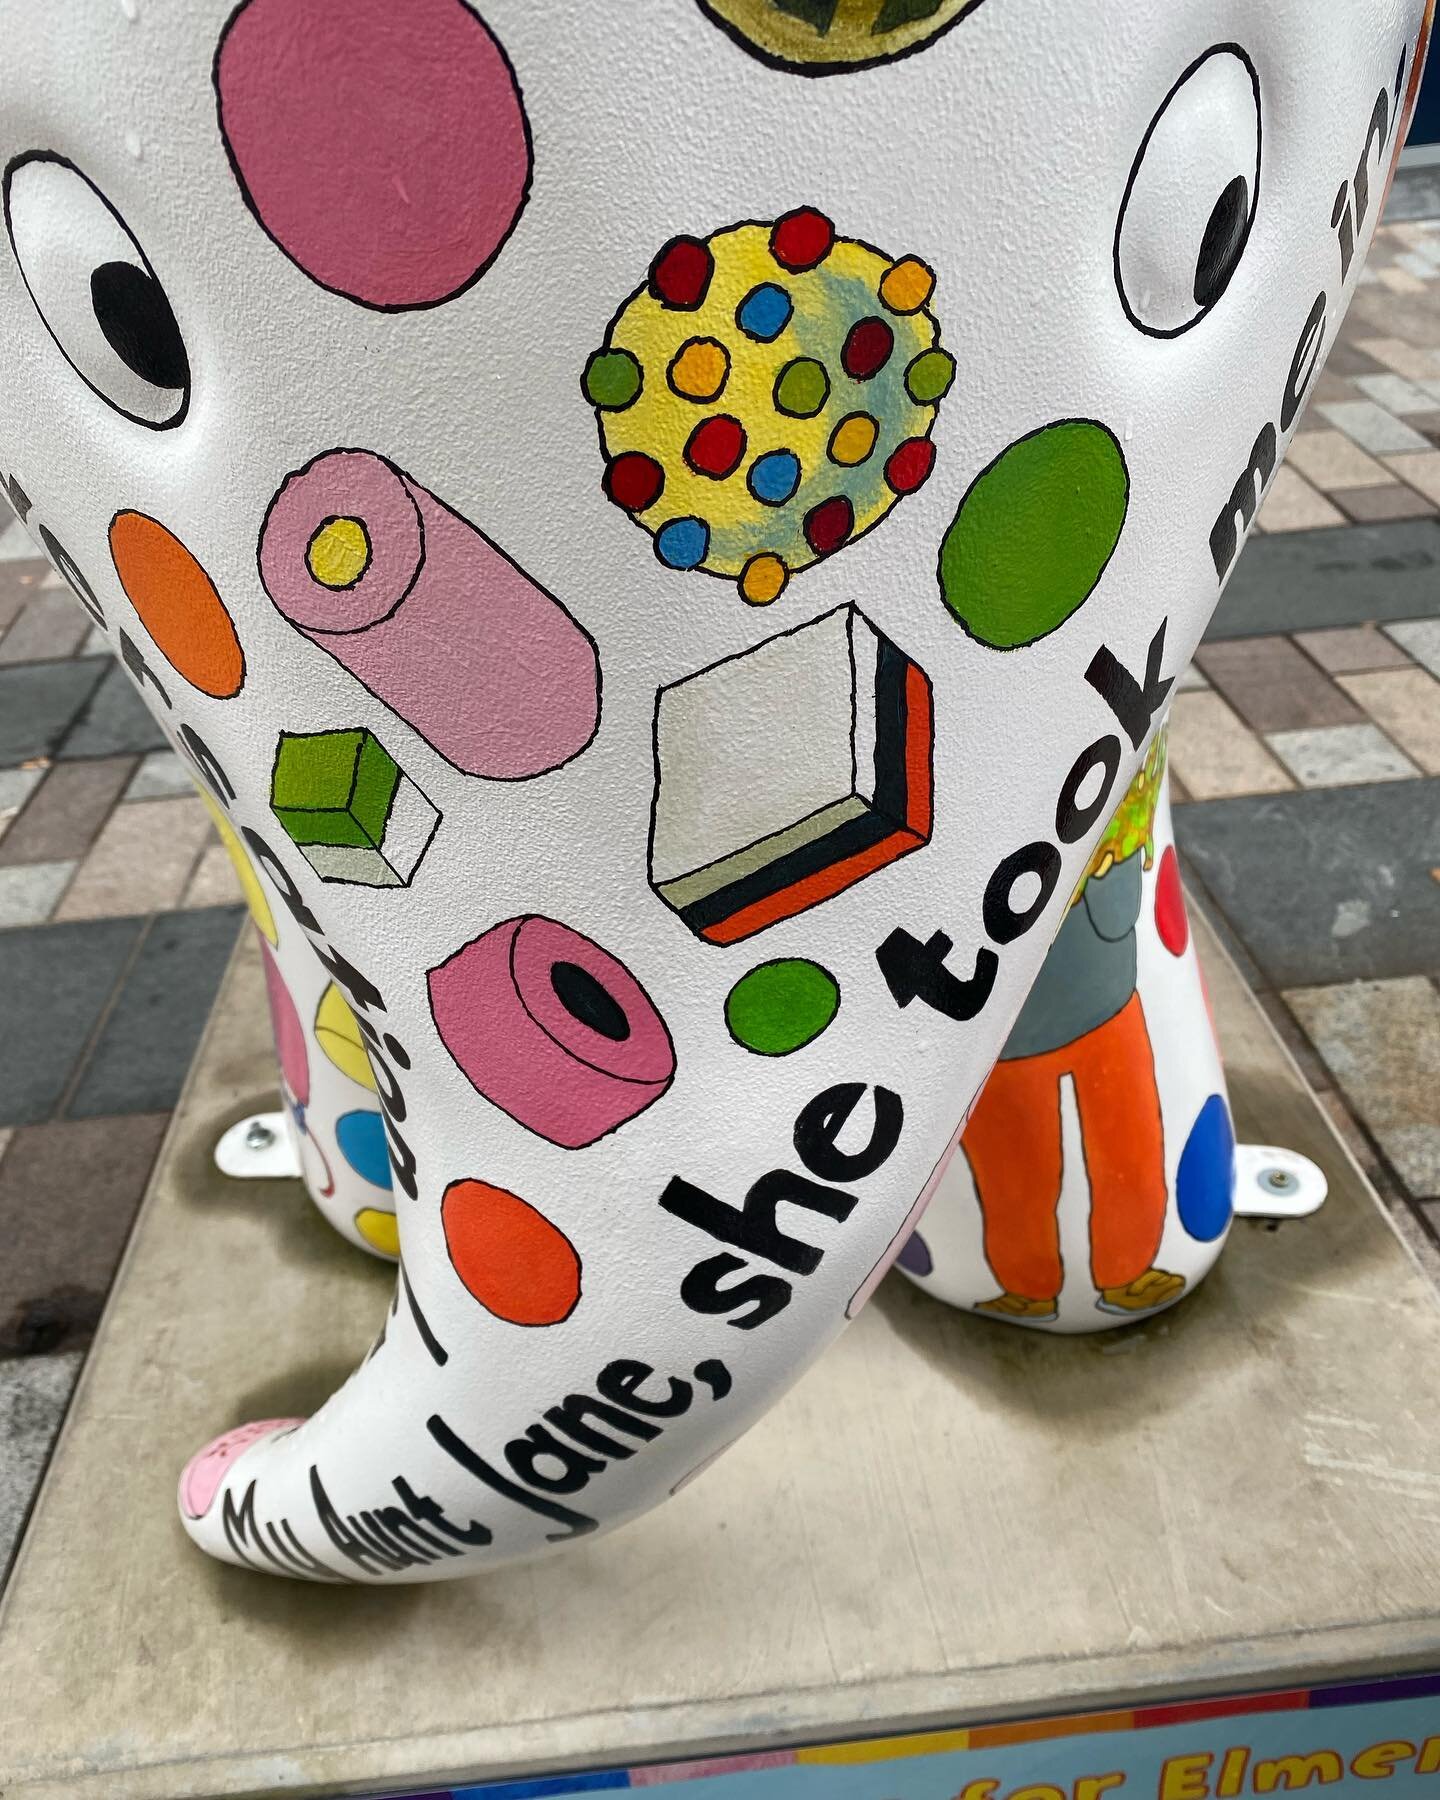 It has meant a lot to me to be part of the @elmerbelfast trail by painting Playtime Elmer. Northern Ireland Hospice supported my husband Gareth and I in the last few months of Gareth&rsquo;s life. He was 40 when he died from salivary gland cancer, in